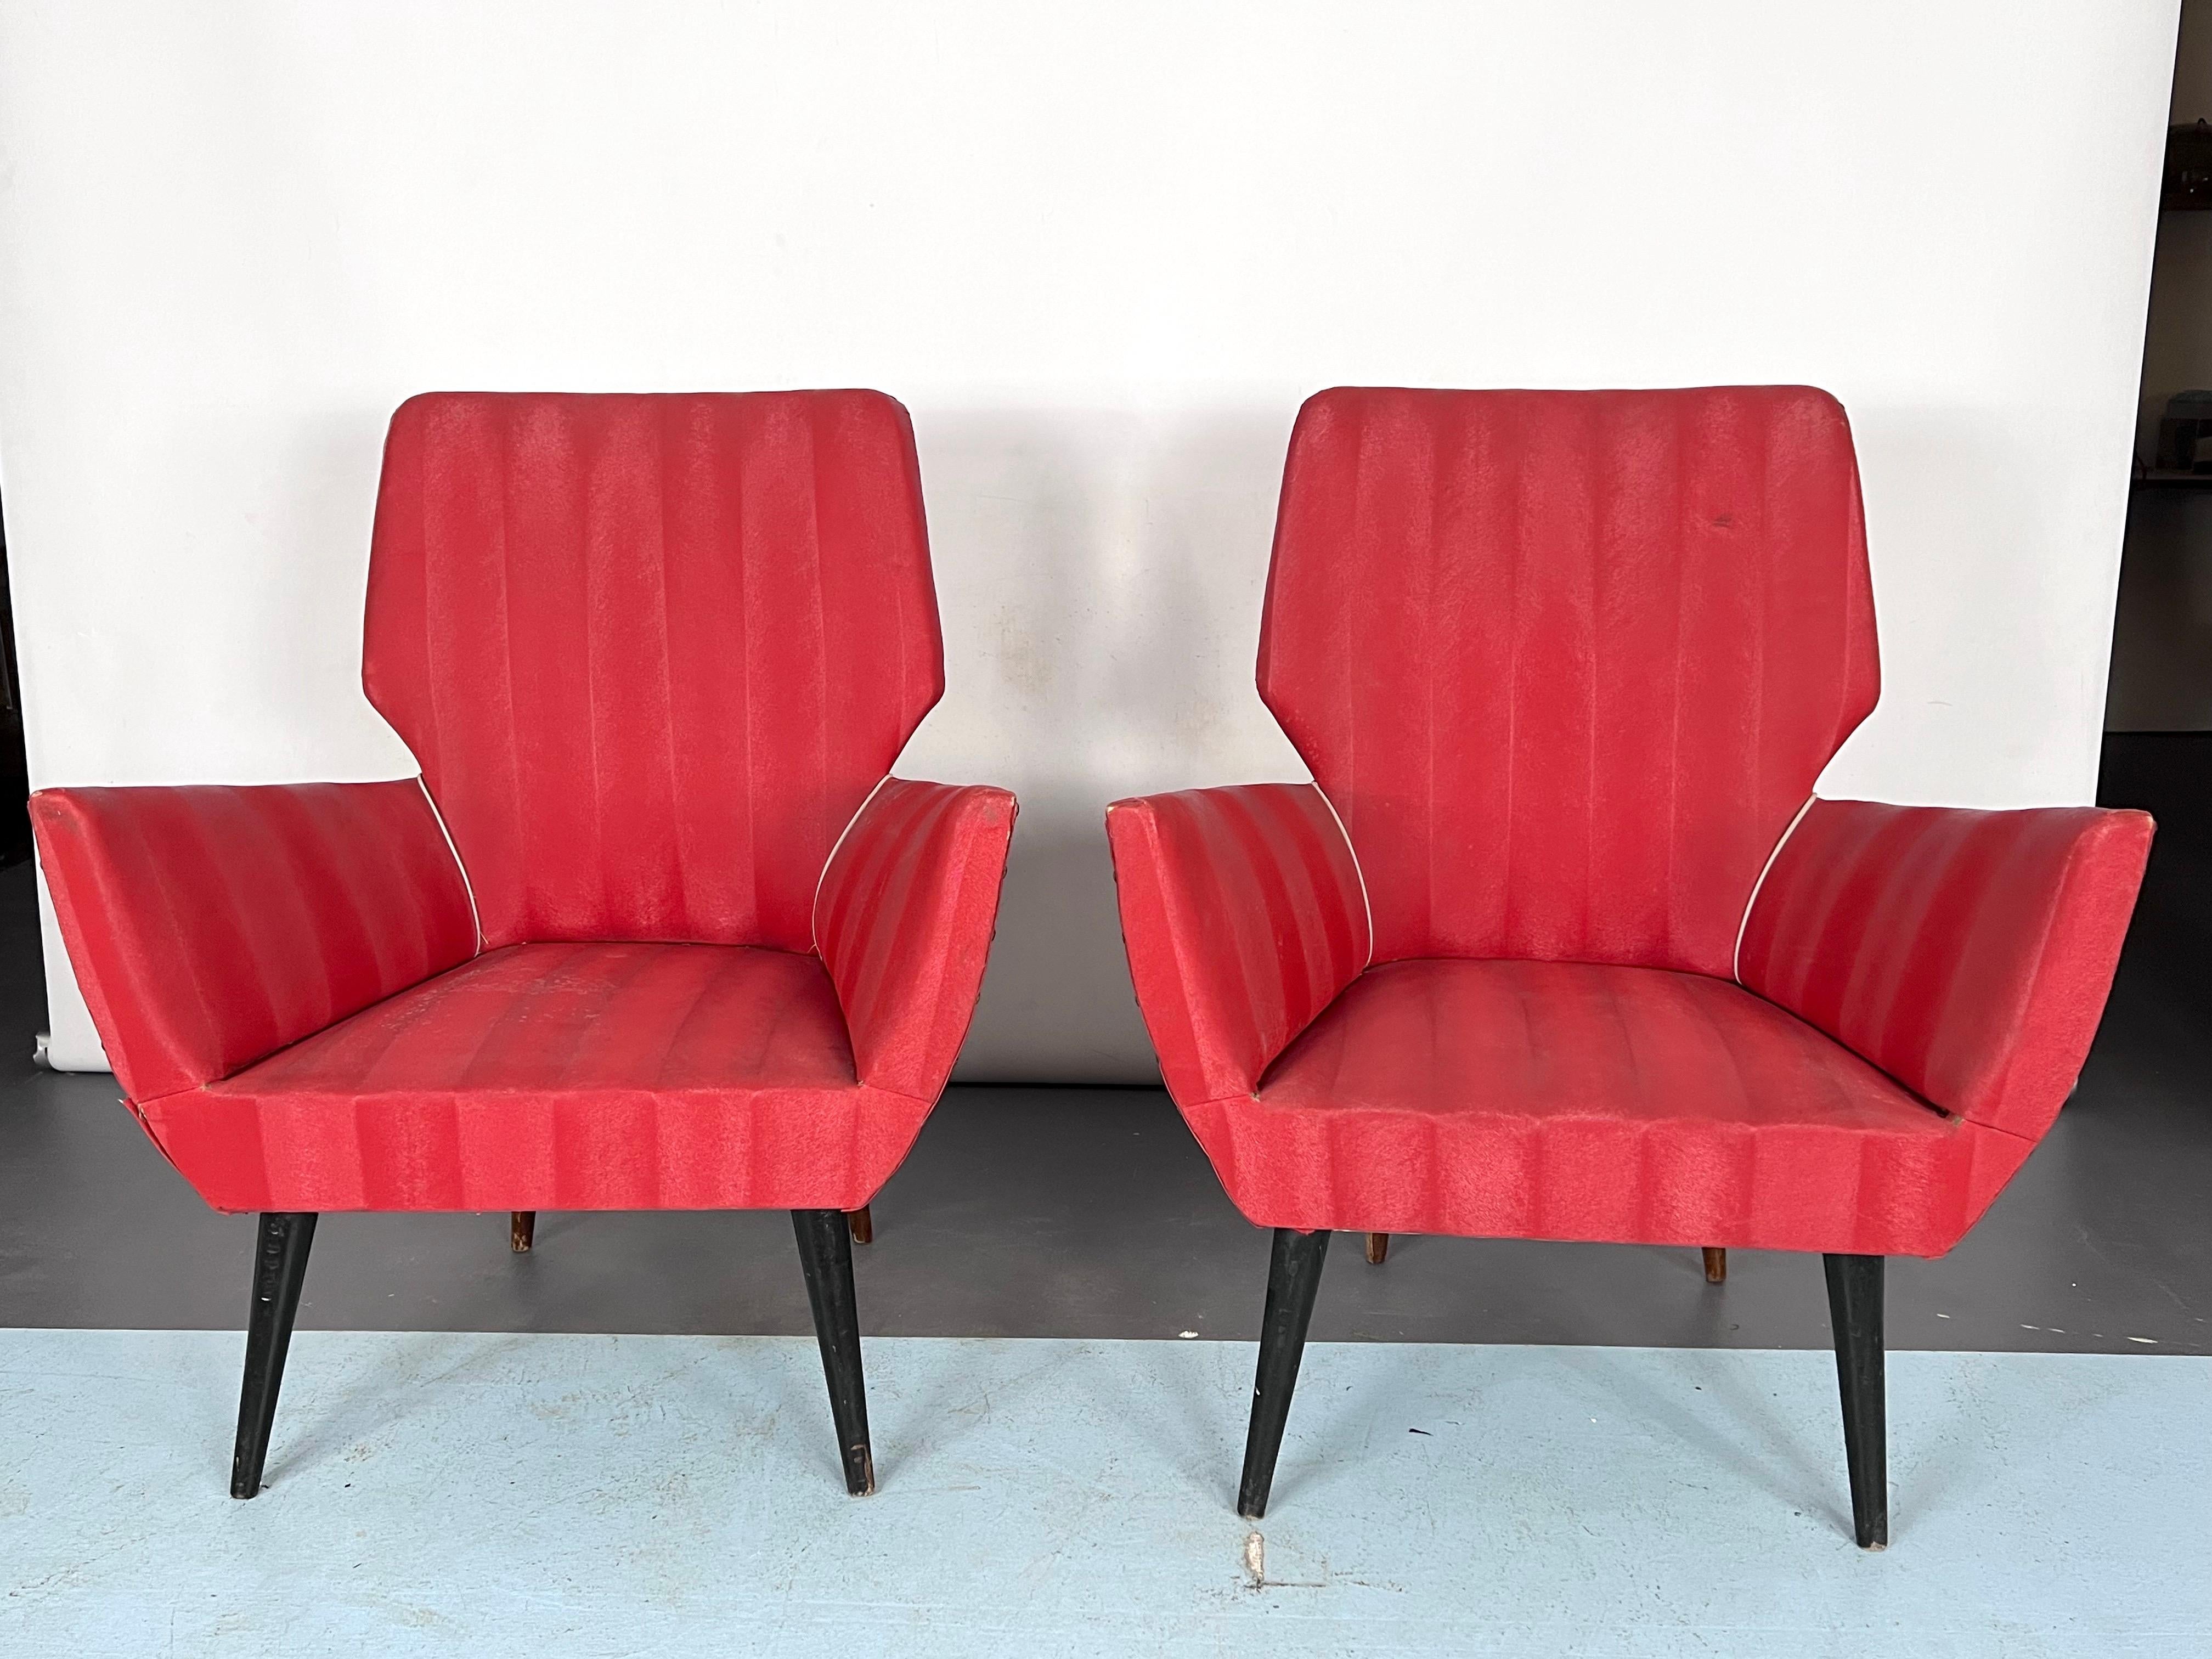 Vintage condition with trace of age and use for this set of two Italian armchairs with wood legs. The plastic fabric can have some small defects.
